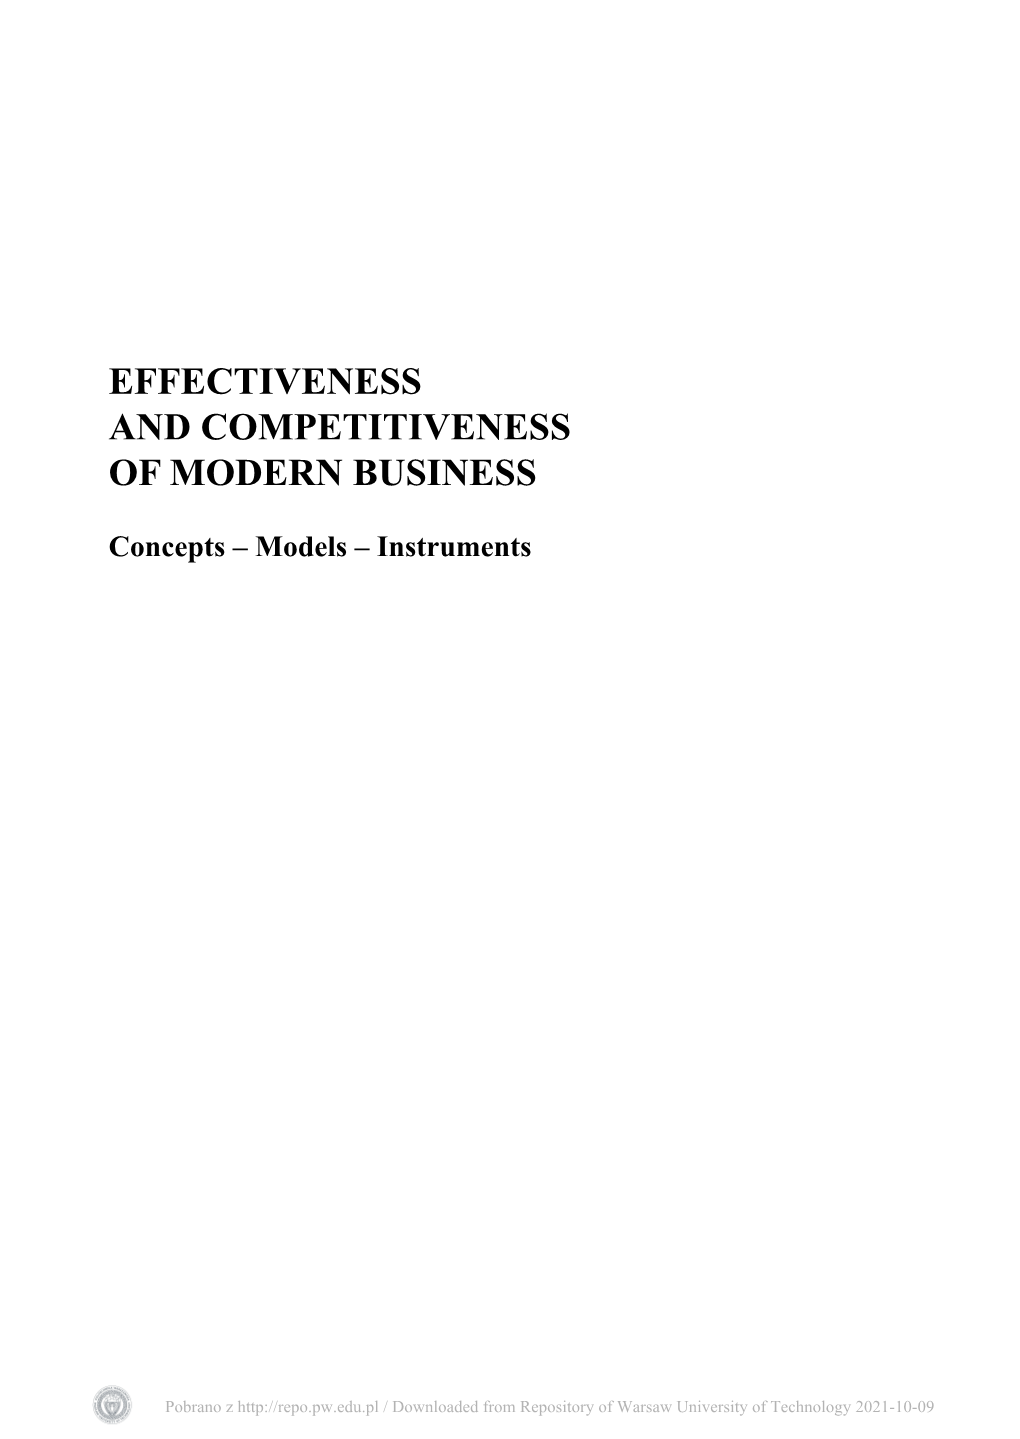 Effectiveness and Competitiveness of Modern Business